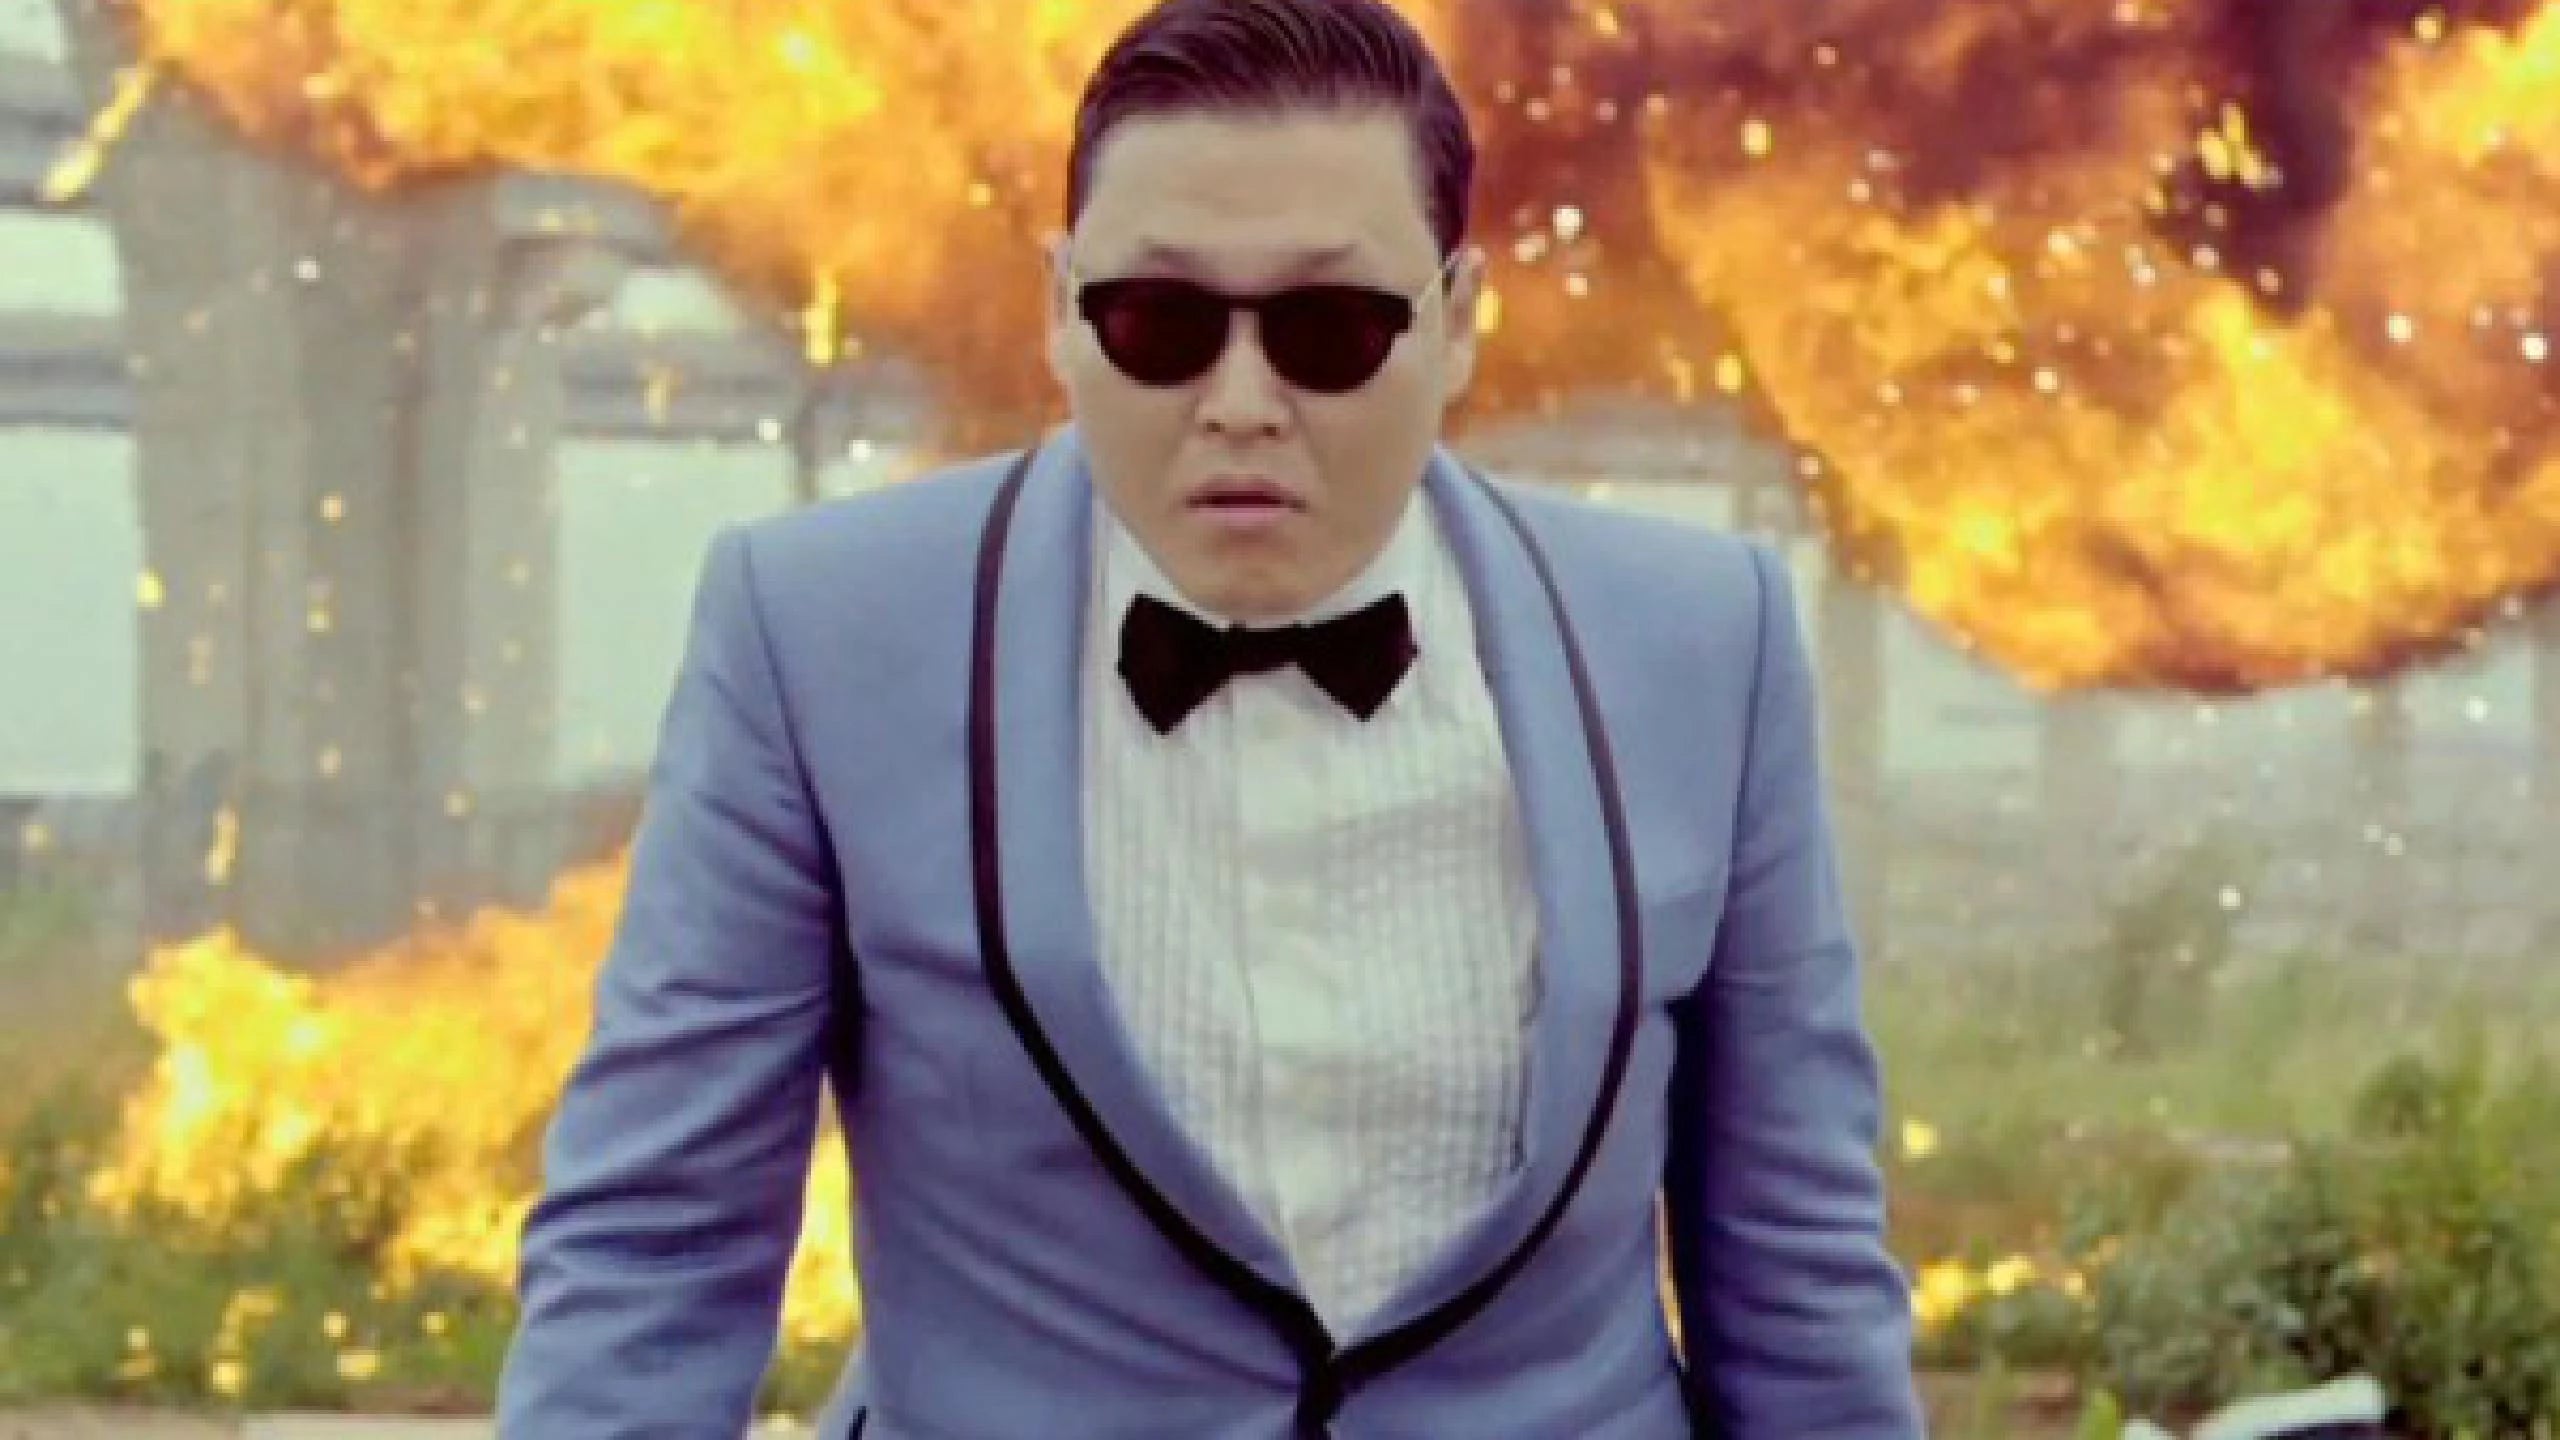 🇰🇷 Buy PSY albums and merch online at Seoul-Mate.de